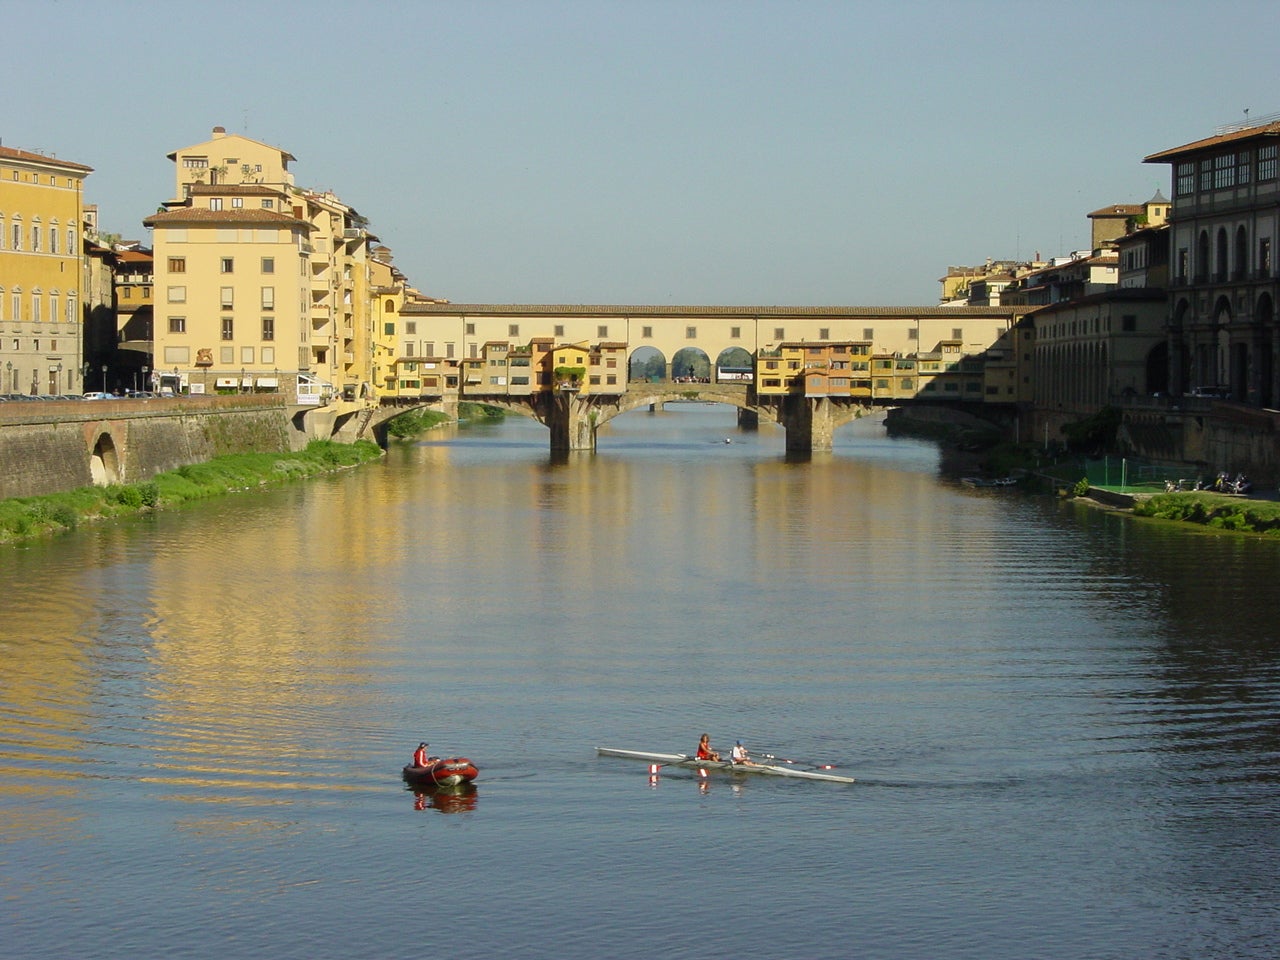 Opening up: Ponte Vecchio in Florence